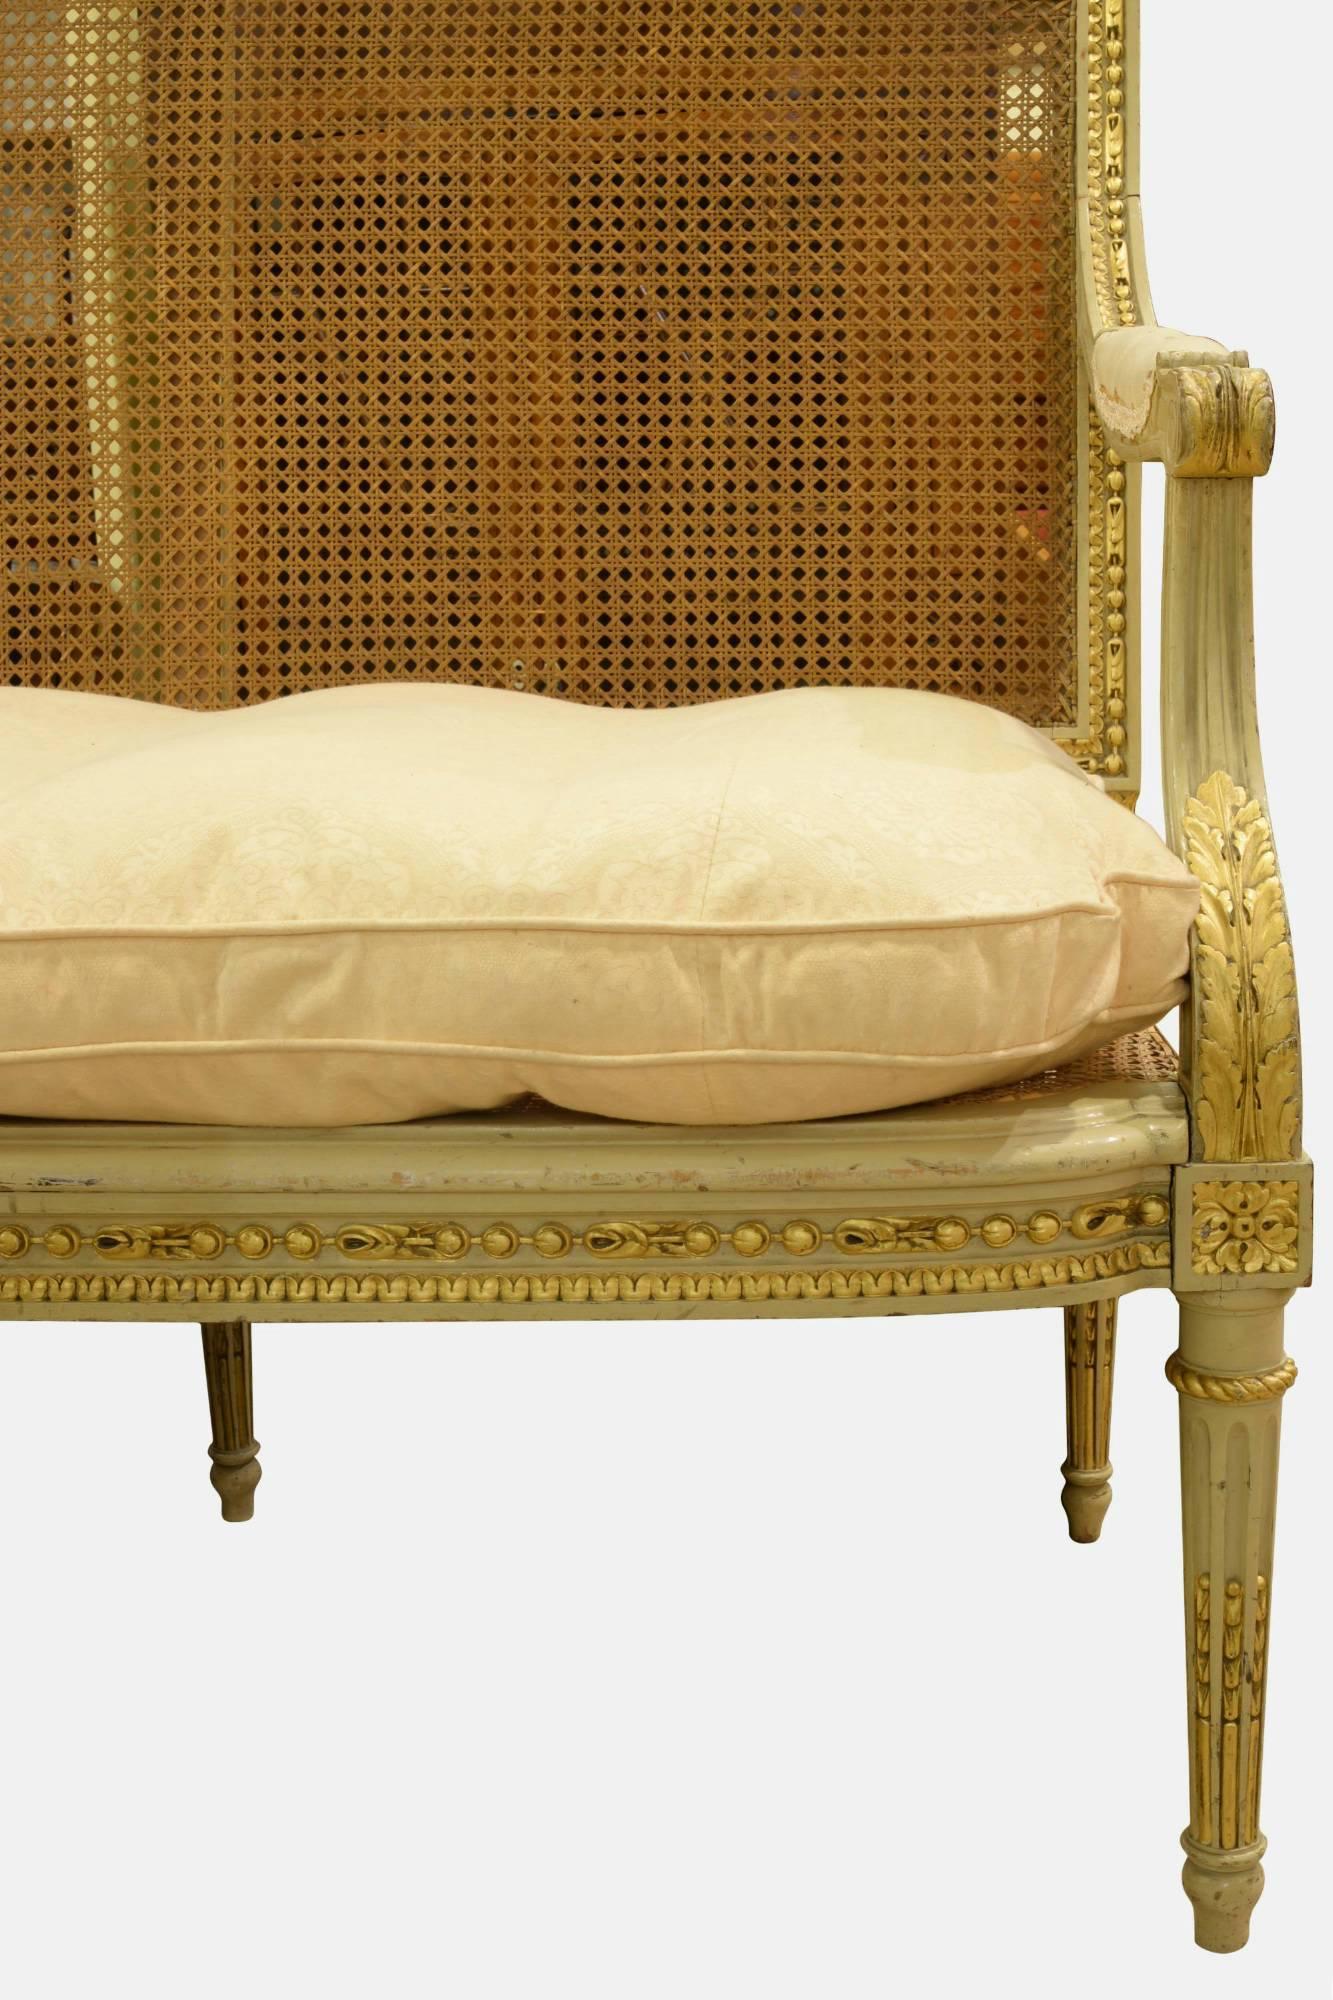 20th Century French Louis XVI Style Painted Gilded Sofa